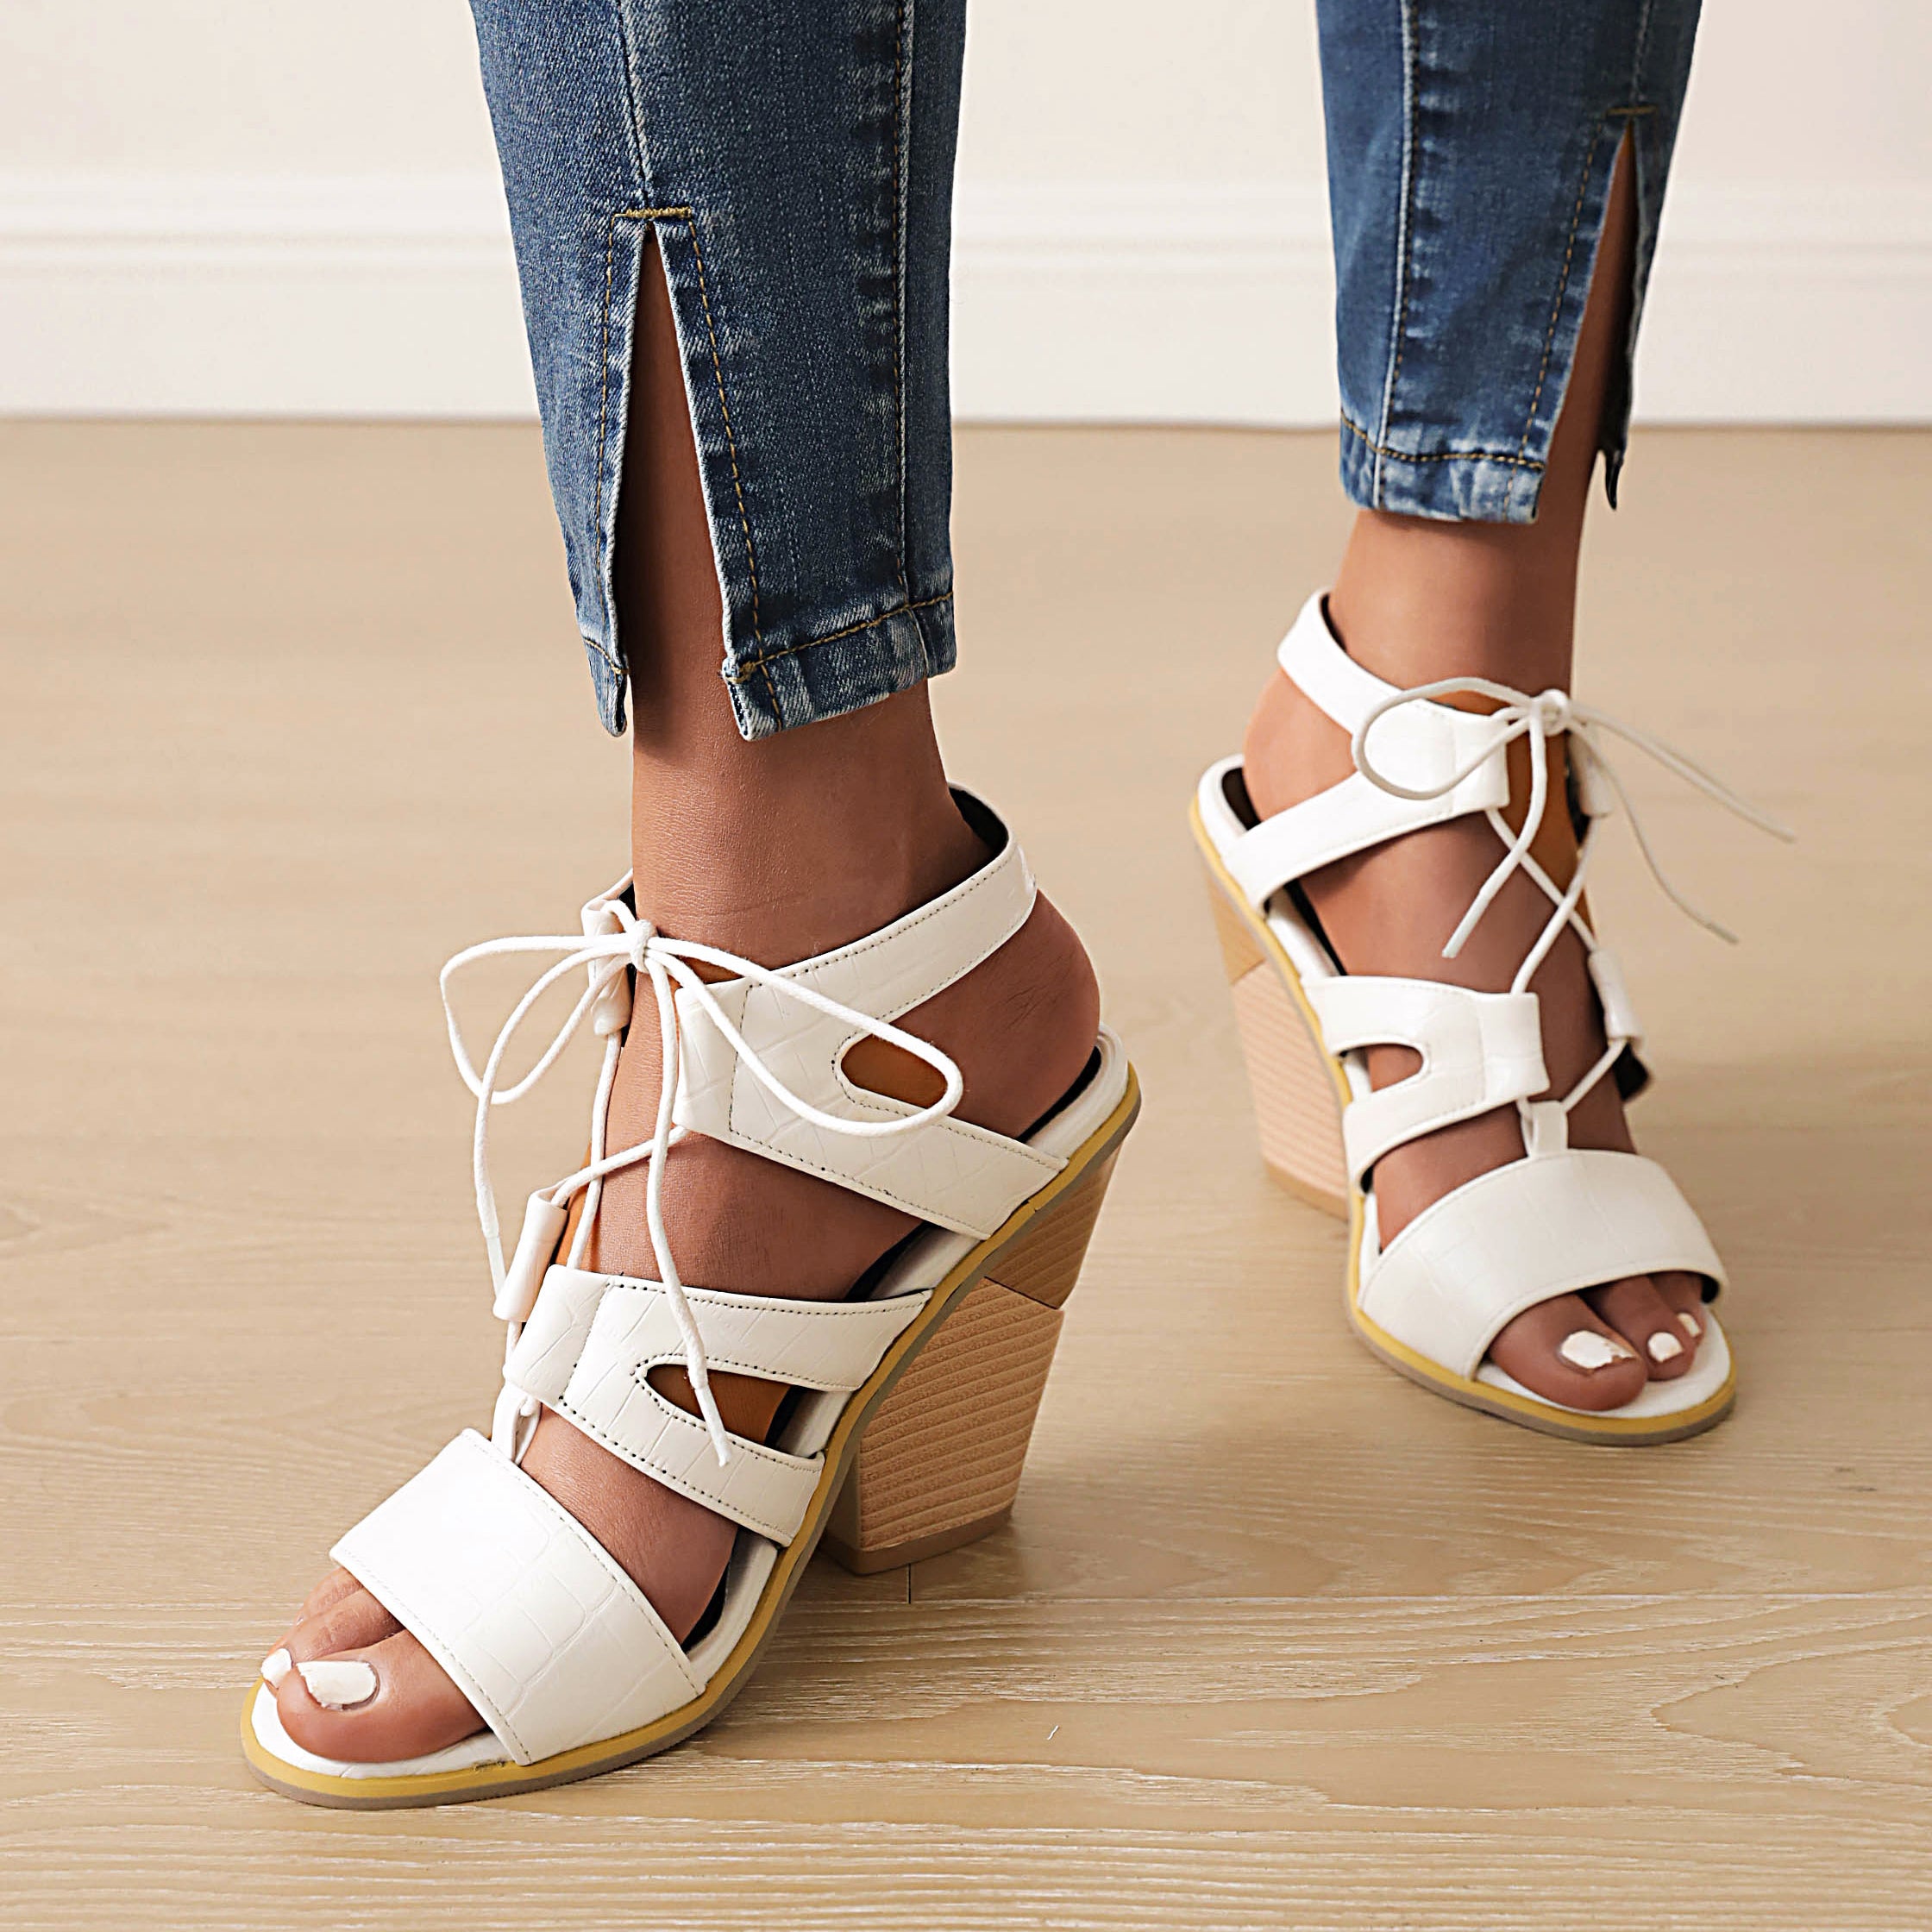 Bigsizeheels Chunky Heel Fish Mouth Lace-Up Sandals - White best oversized womens heels are from bigsizeheels®